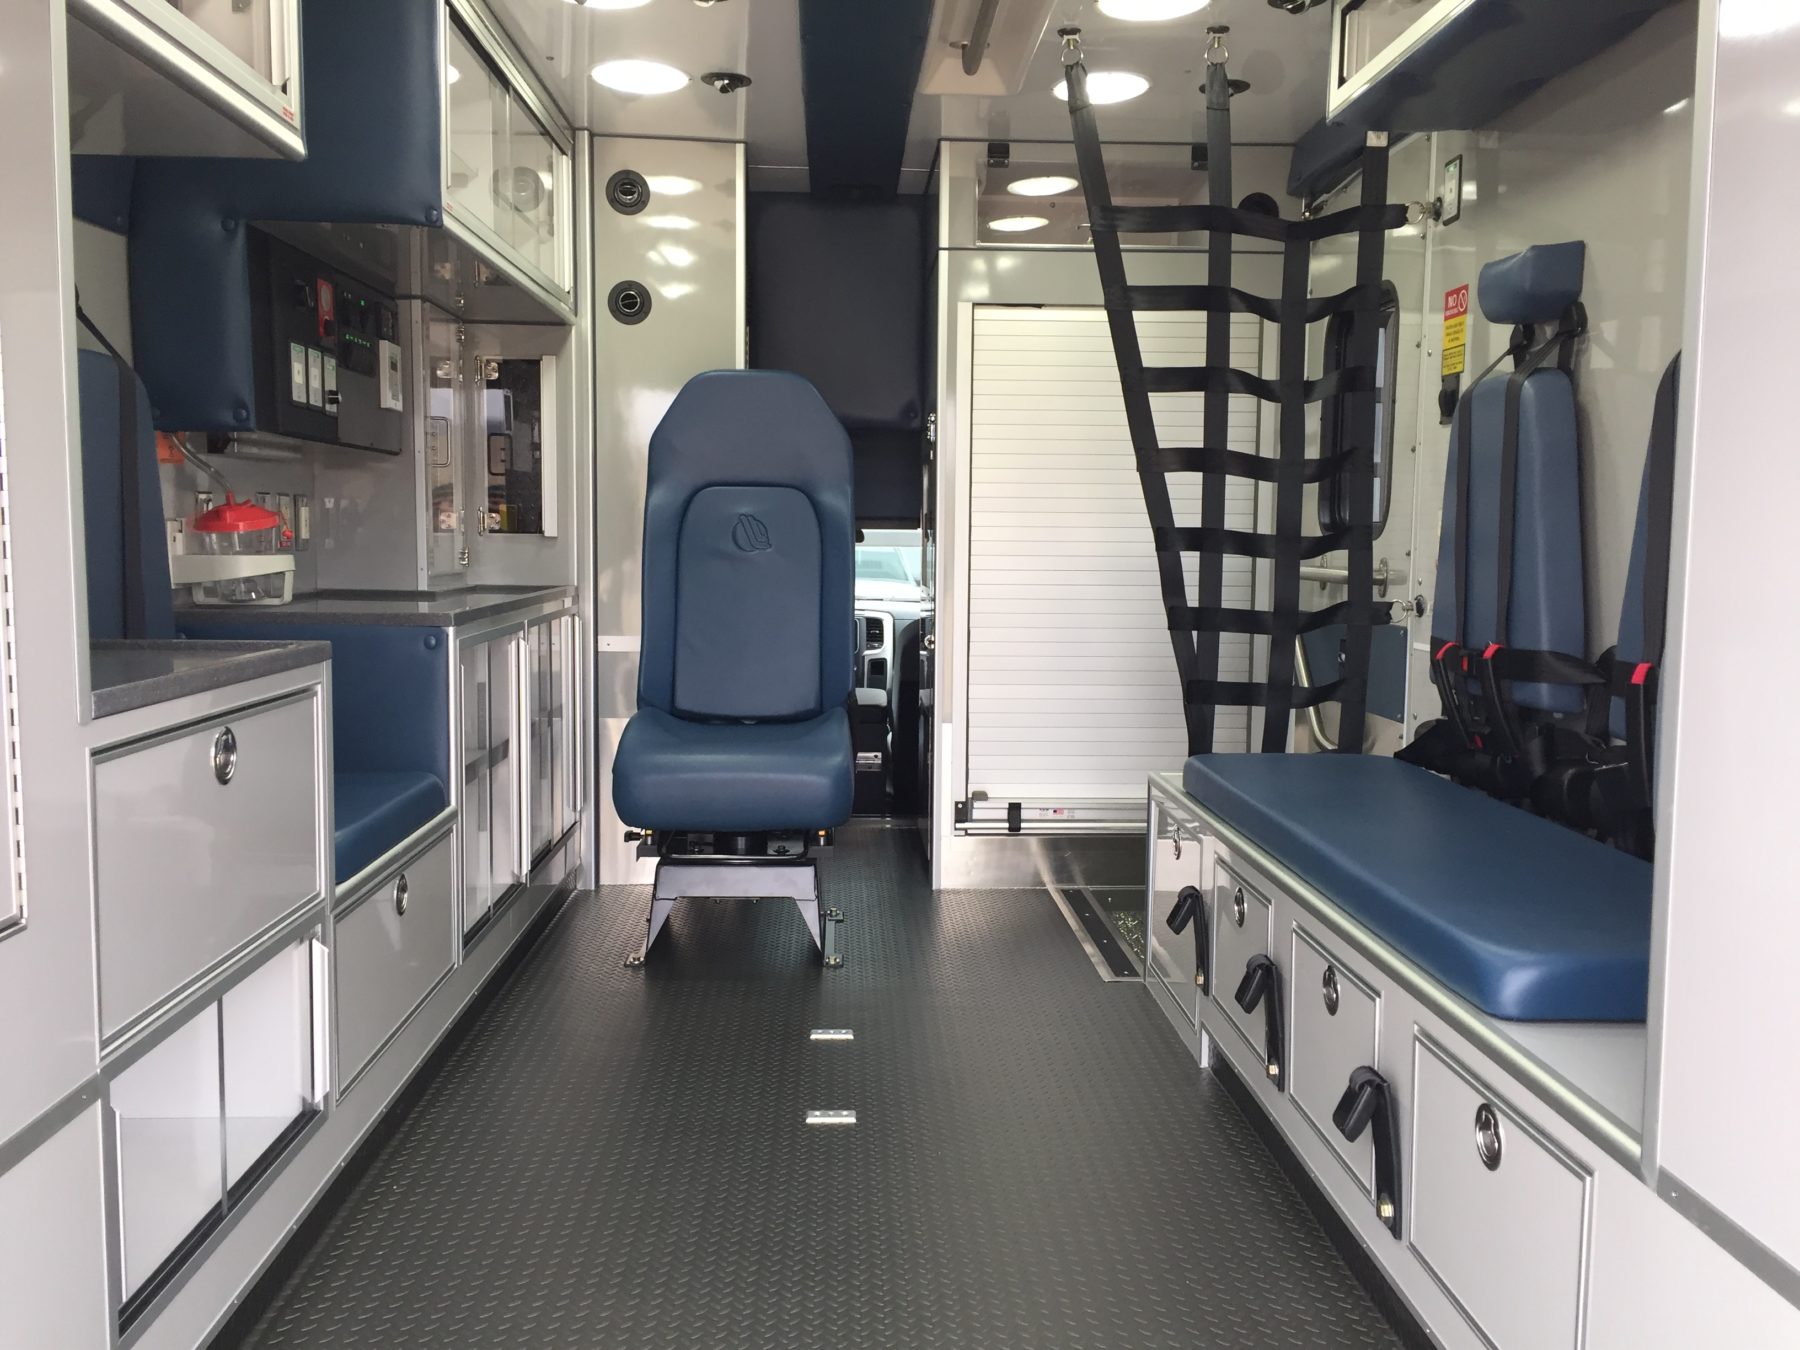 2018 Ram 4500 4x4 Heavy Duty Ambulance For Sale – Picture 2